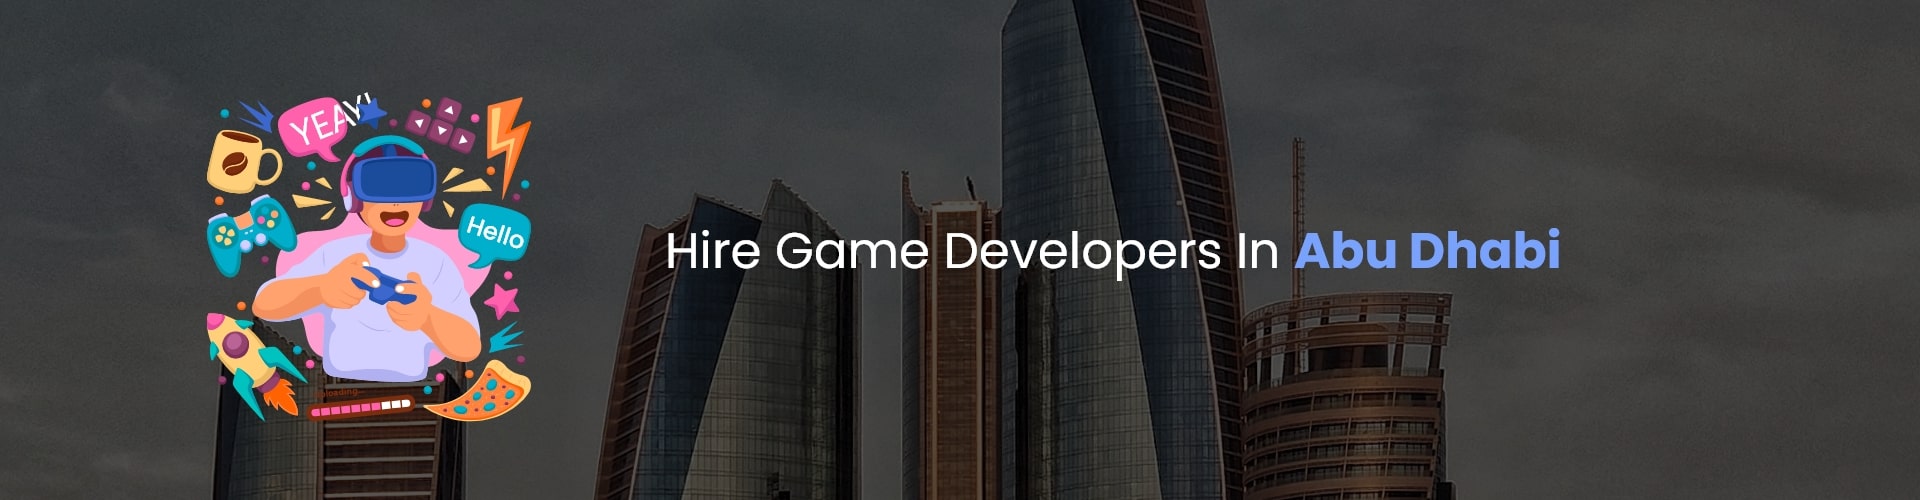 hire game developers in abu dhabi